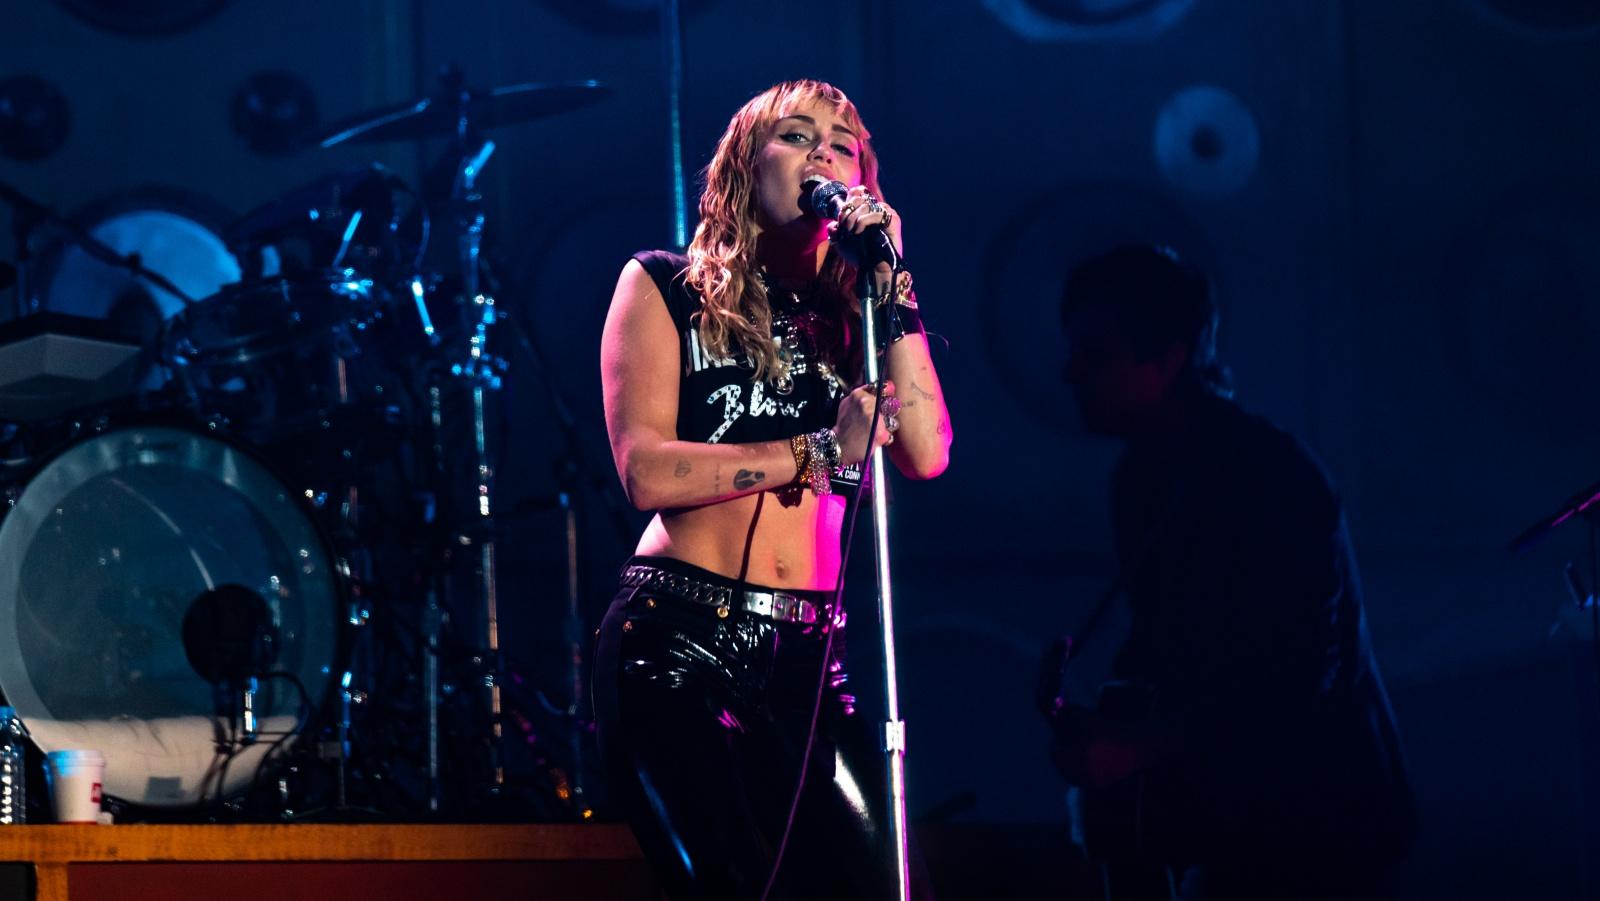 Miley Cyrus performing live in concert